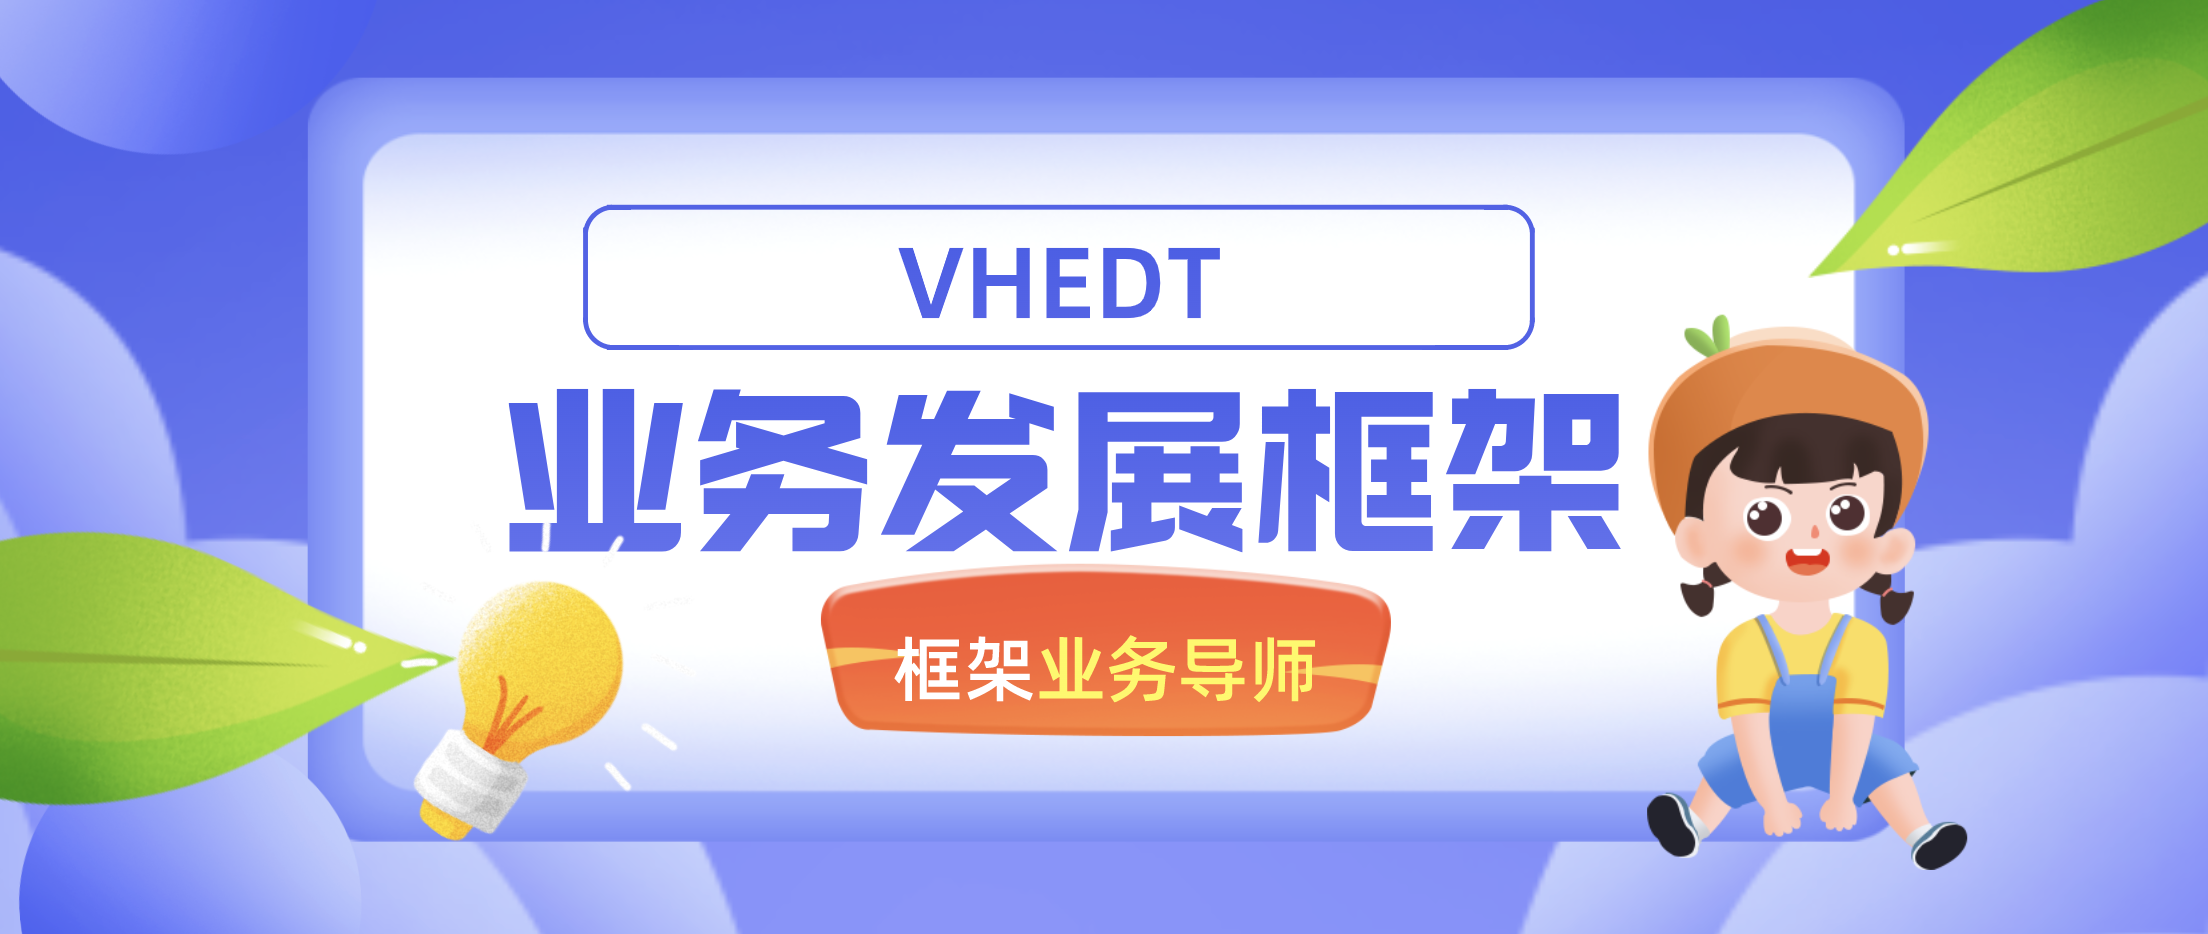 VHEDT业务发展框架